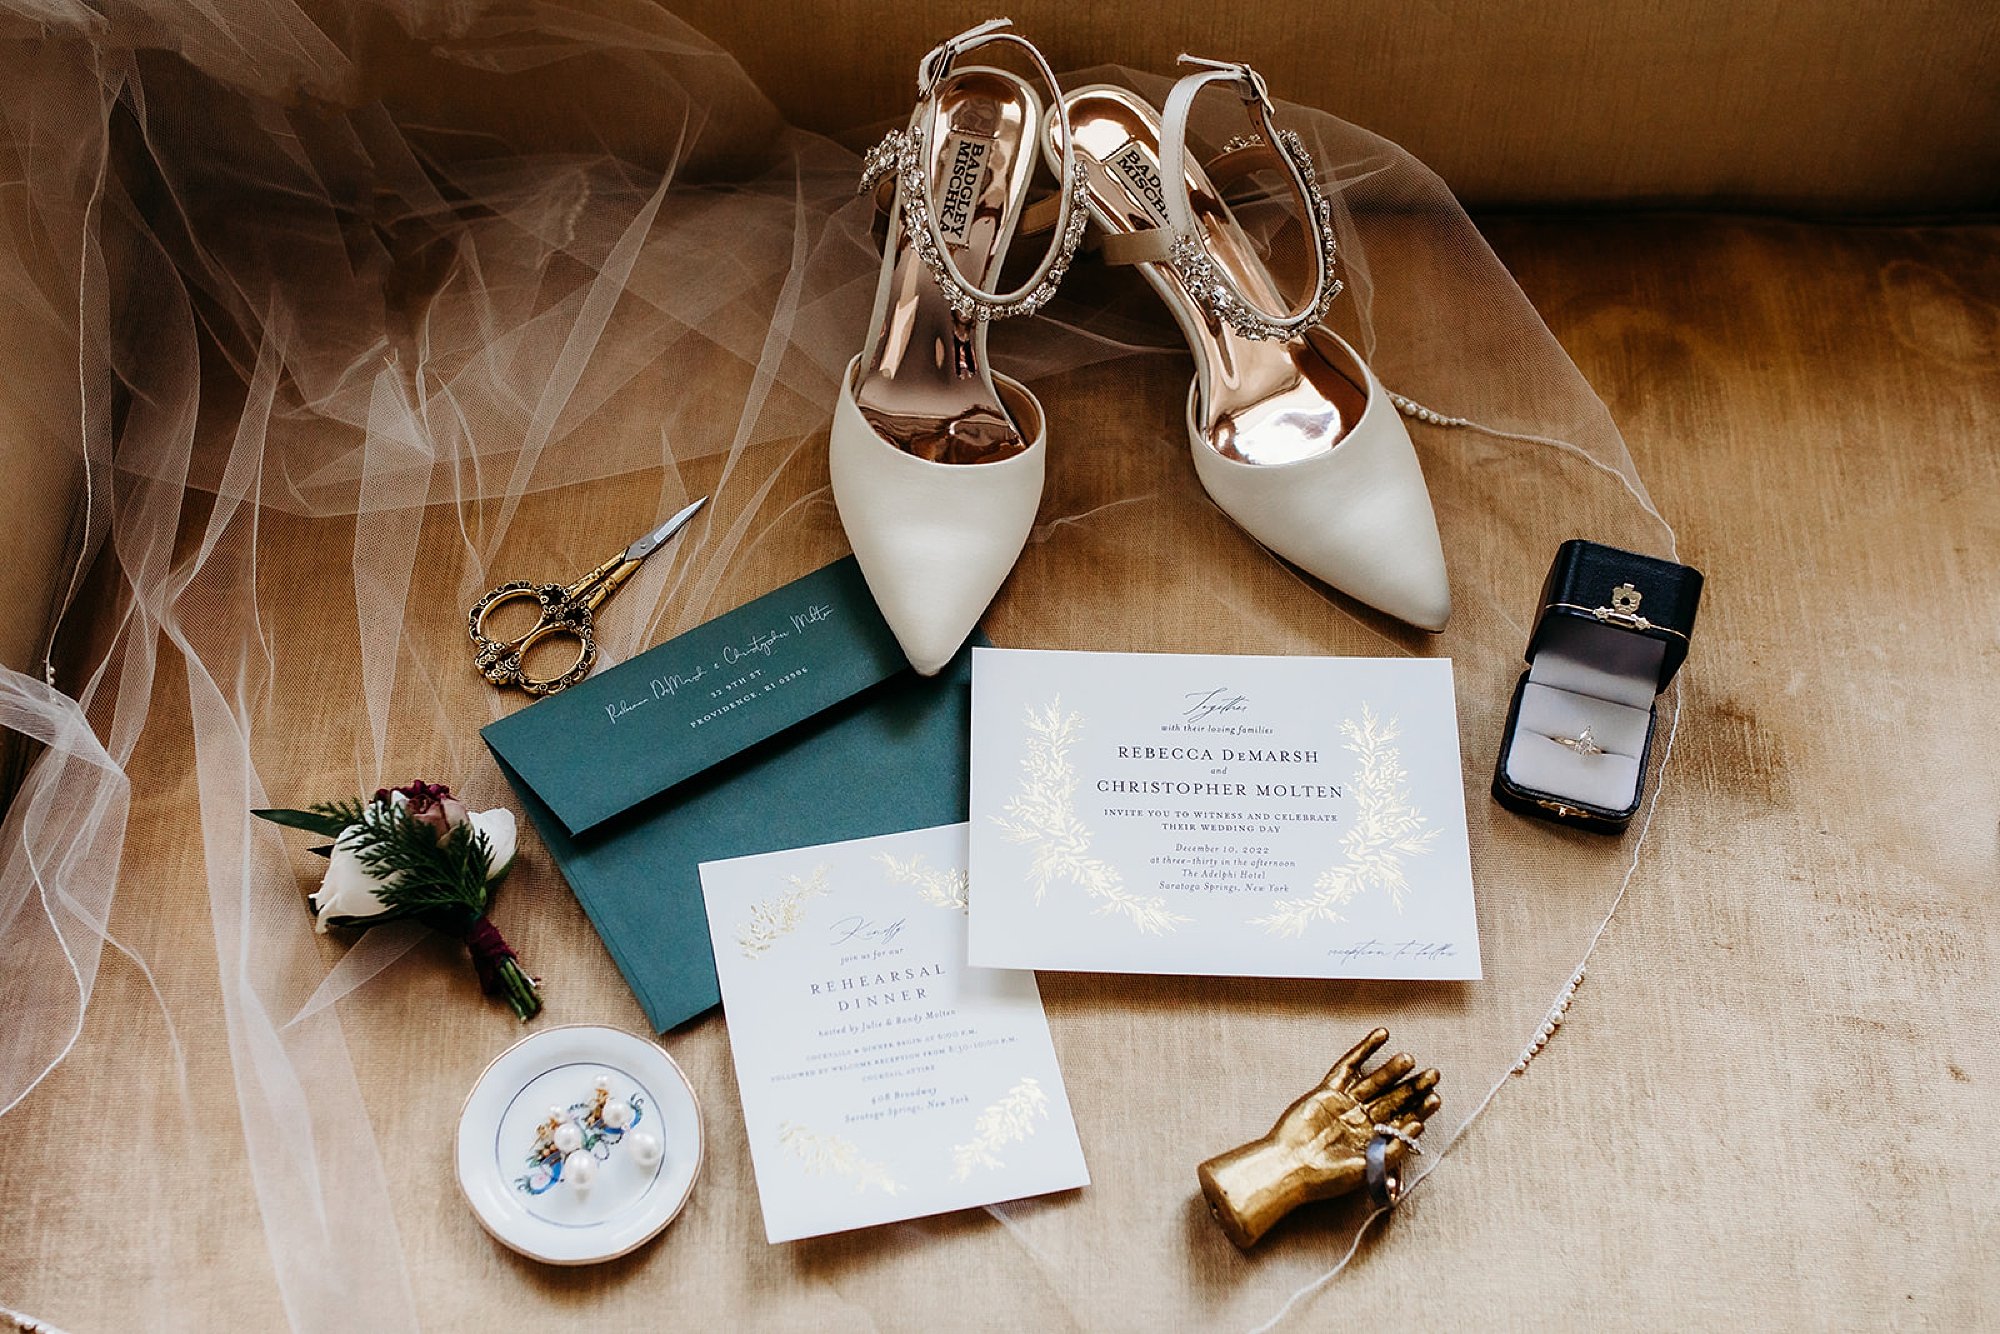 bride's shoes and invitation for winter wedding at The Adelphi Hotel